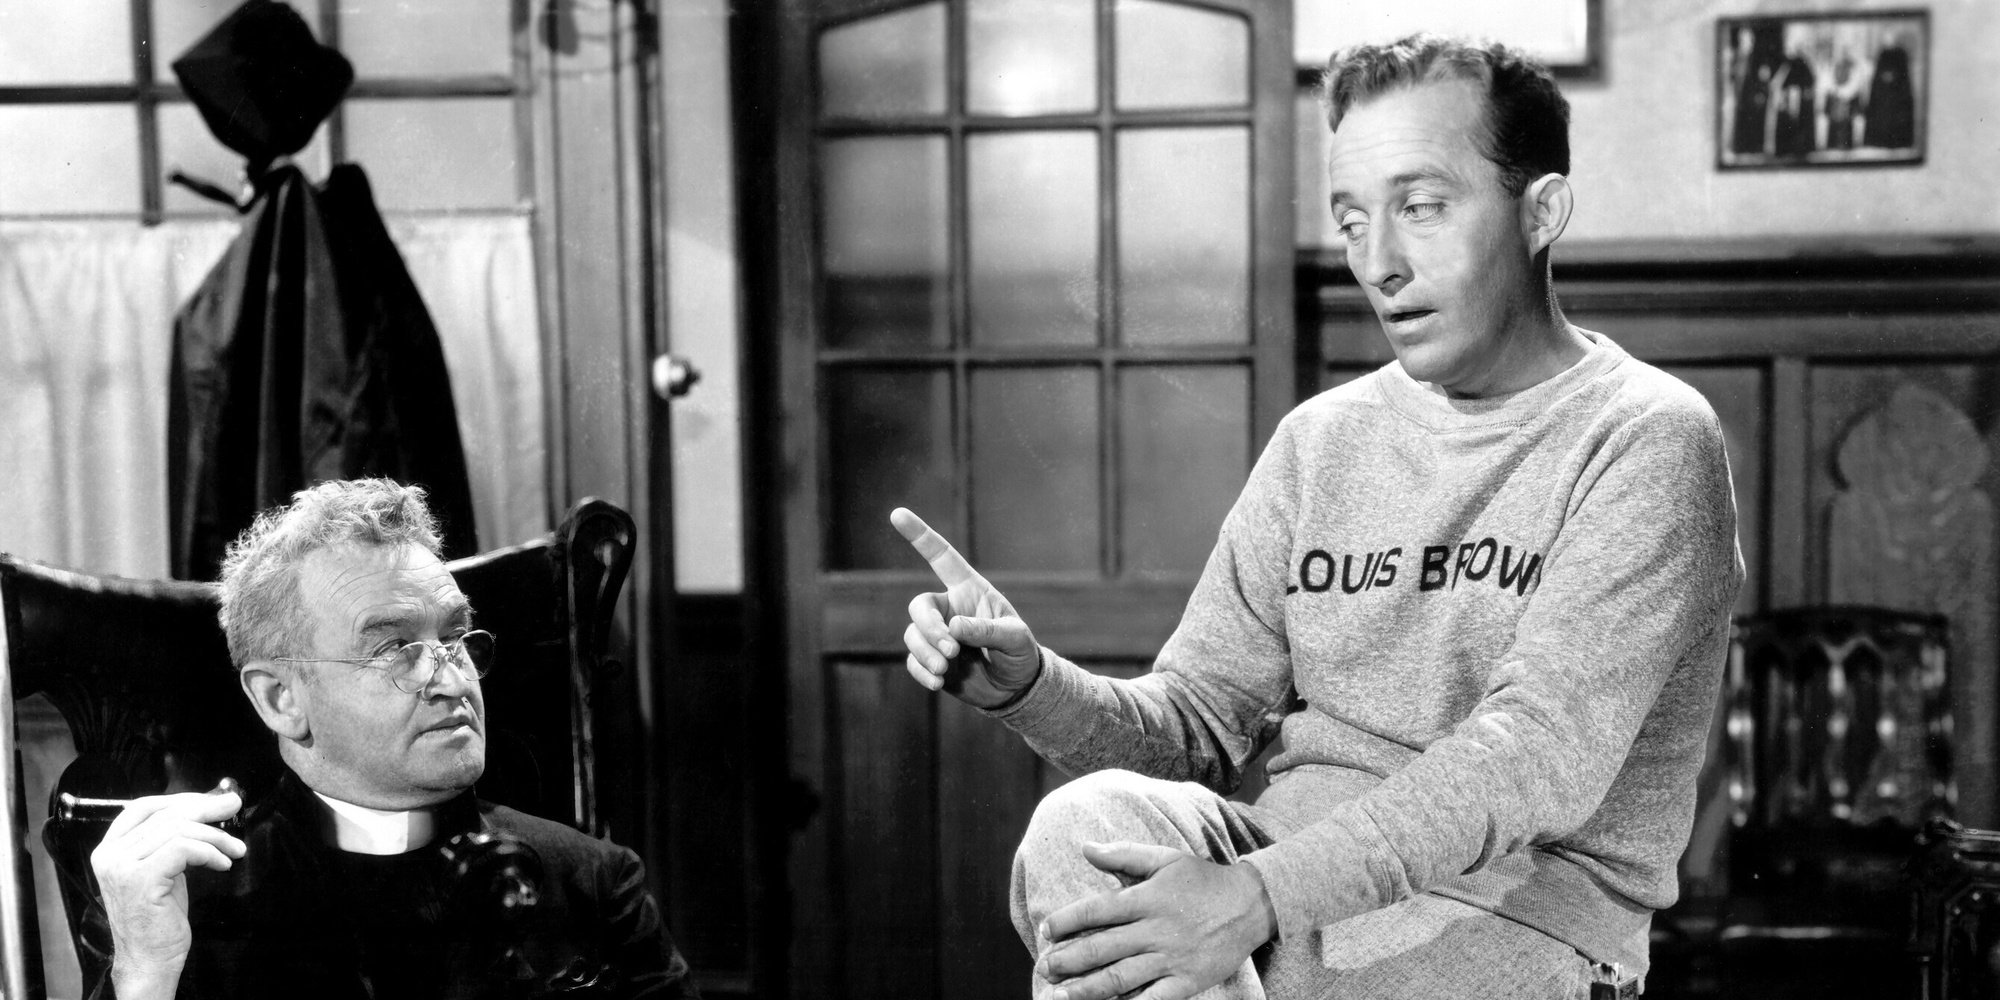 A black and white image of Chuck O'Malley (Bing Crosby) pointing his finger in Going My Way (1944).